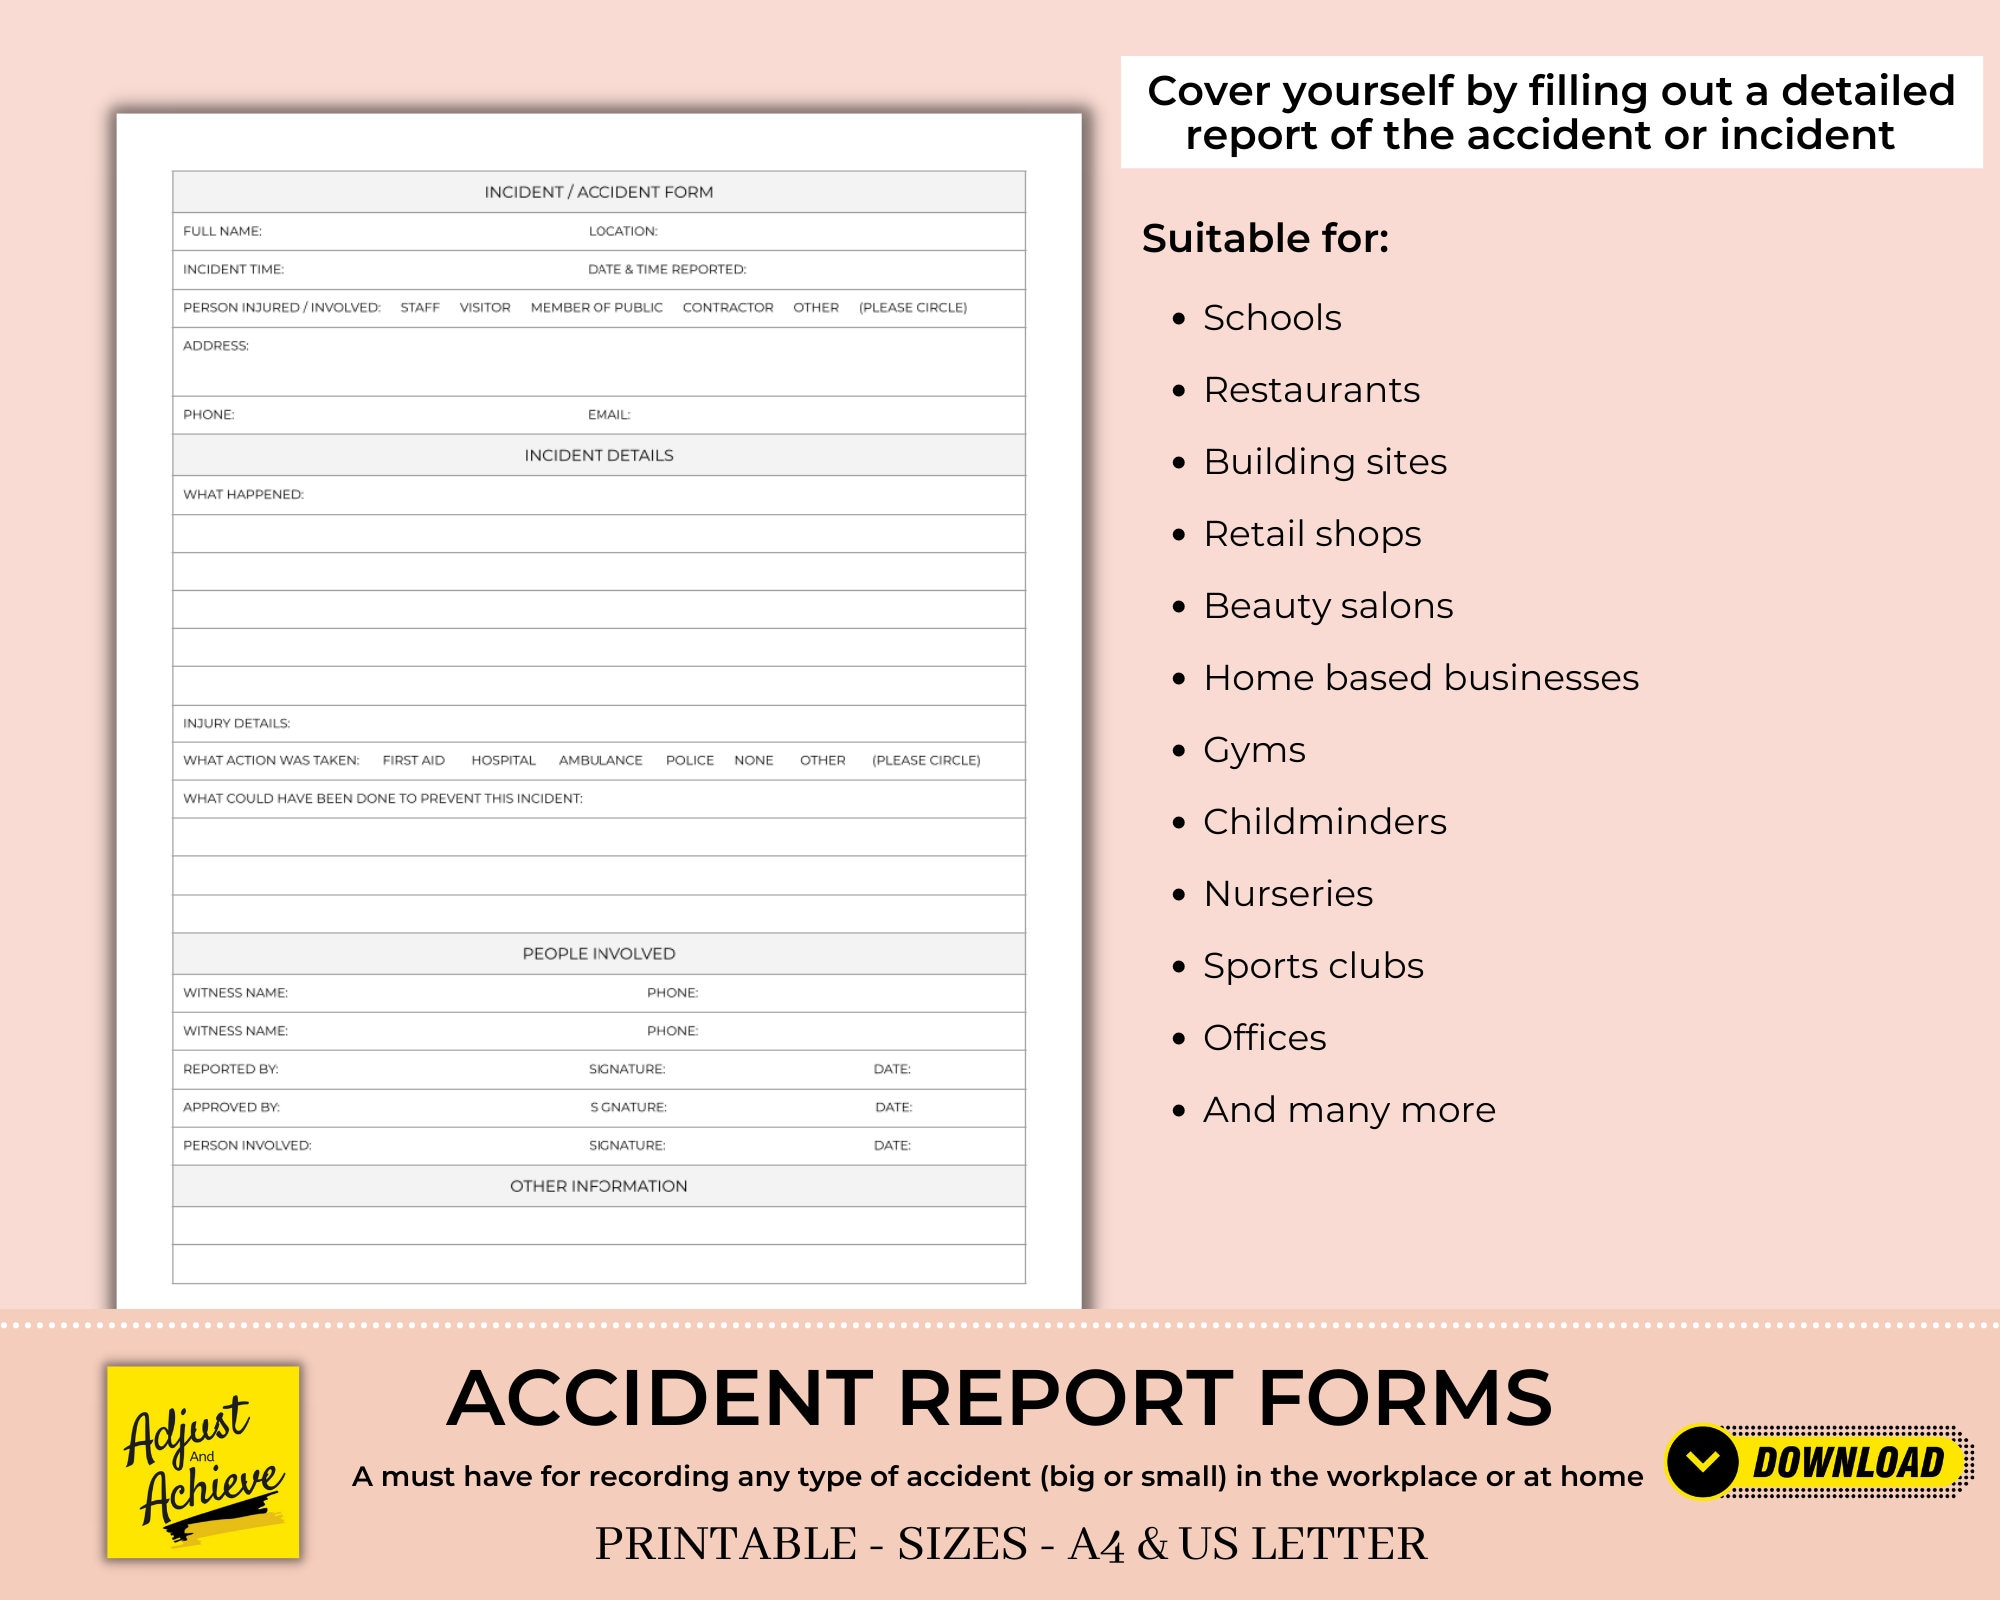 Printable Accident / Incident Report Forms Template  For Work or Home  Based Business  Health & Safety Compliant  Digital Download  (A10) Within Health And Safety Incident Report Form Template